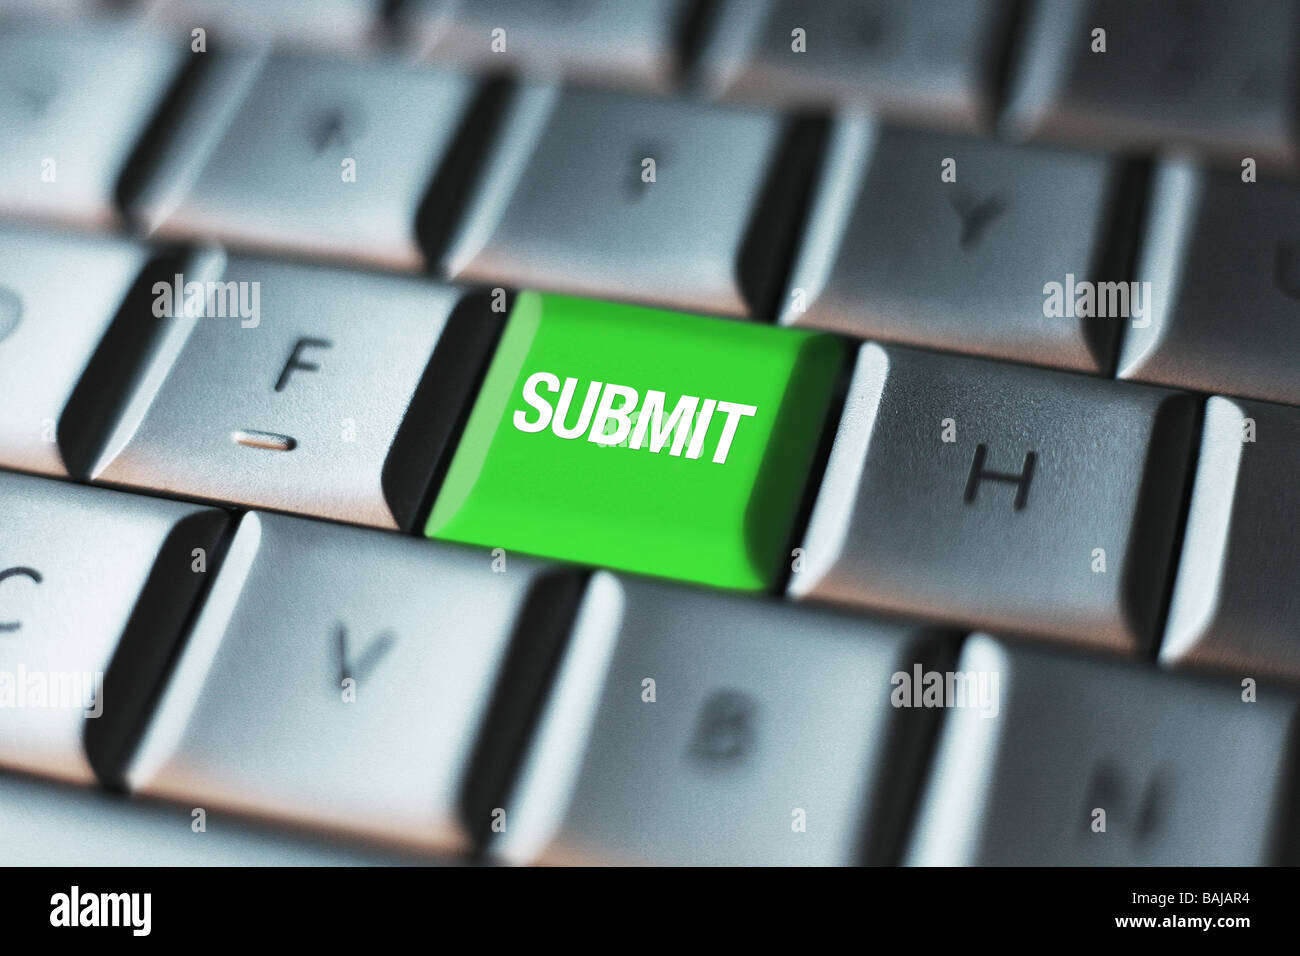 Submit Button on a Computer KeyBoard Stock Photo